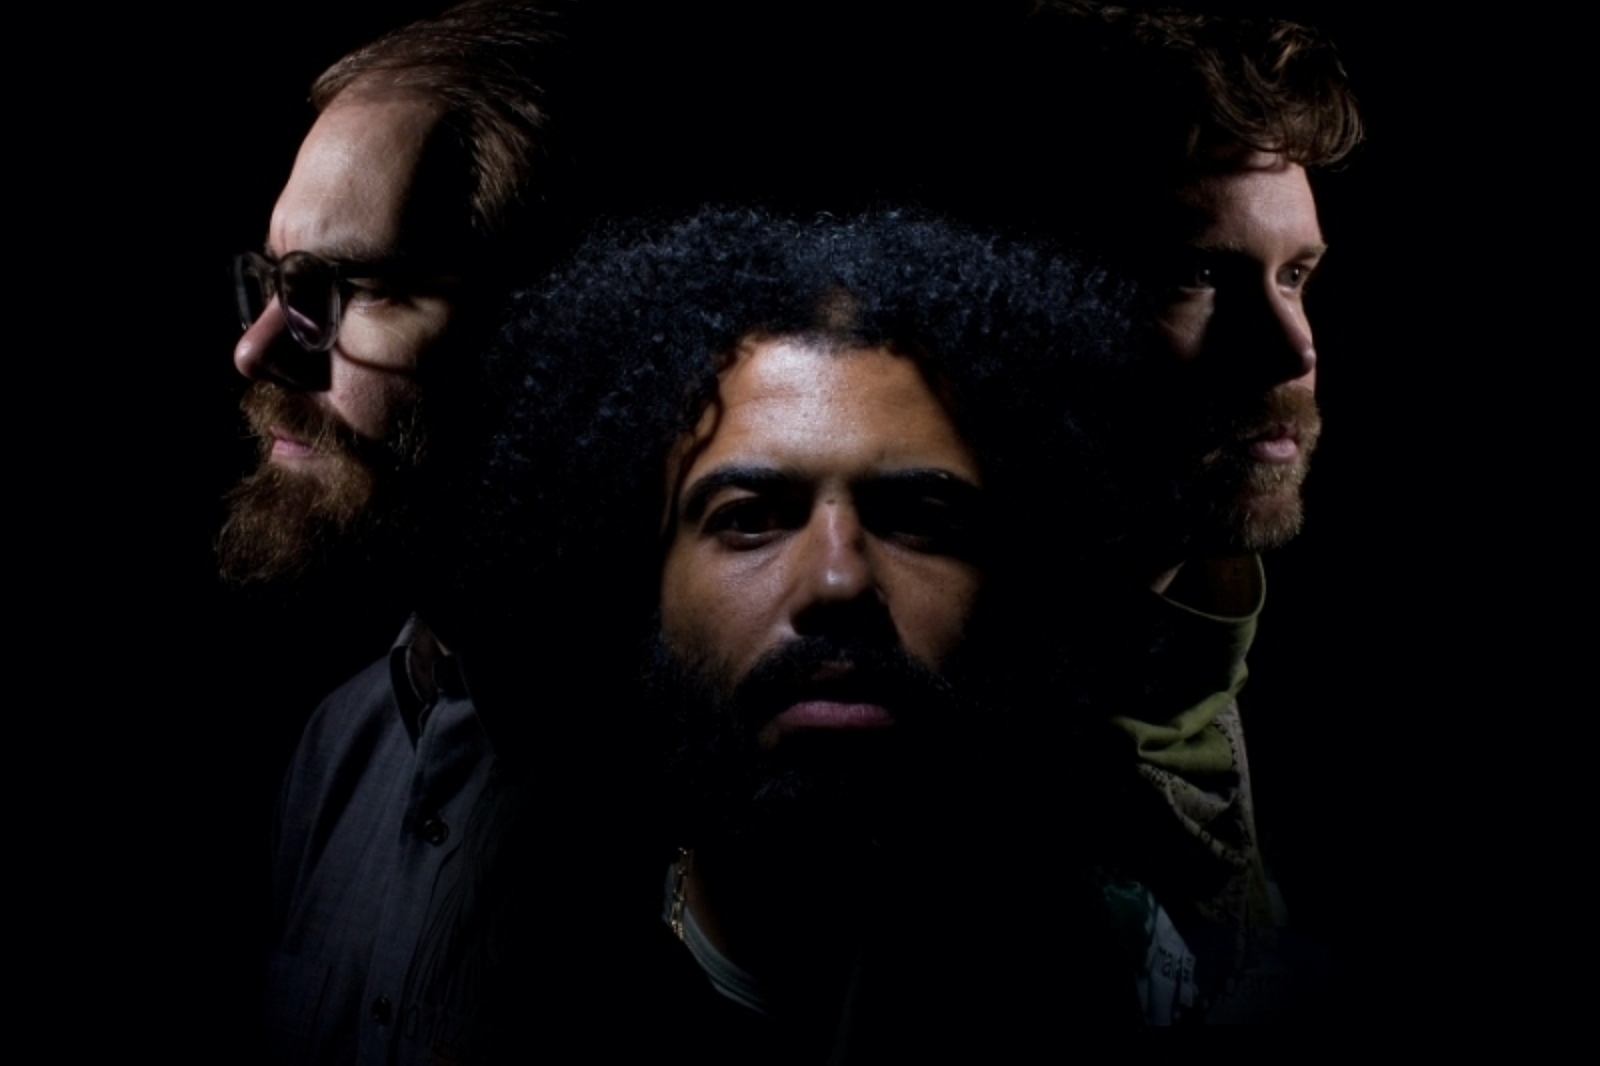 clipping. drop surprise expanded 'Wriggle' EP